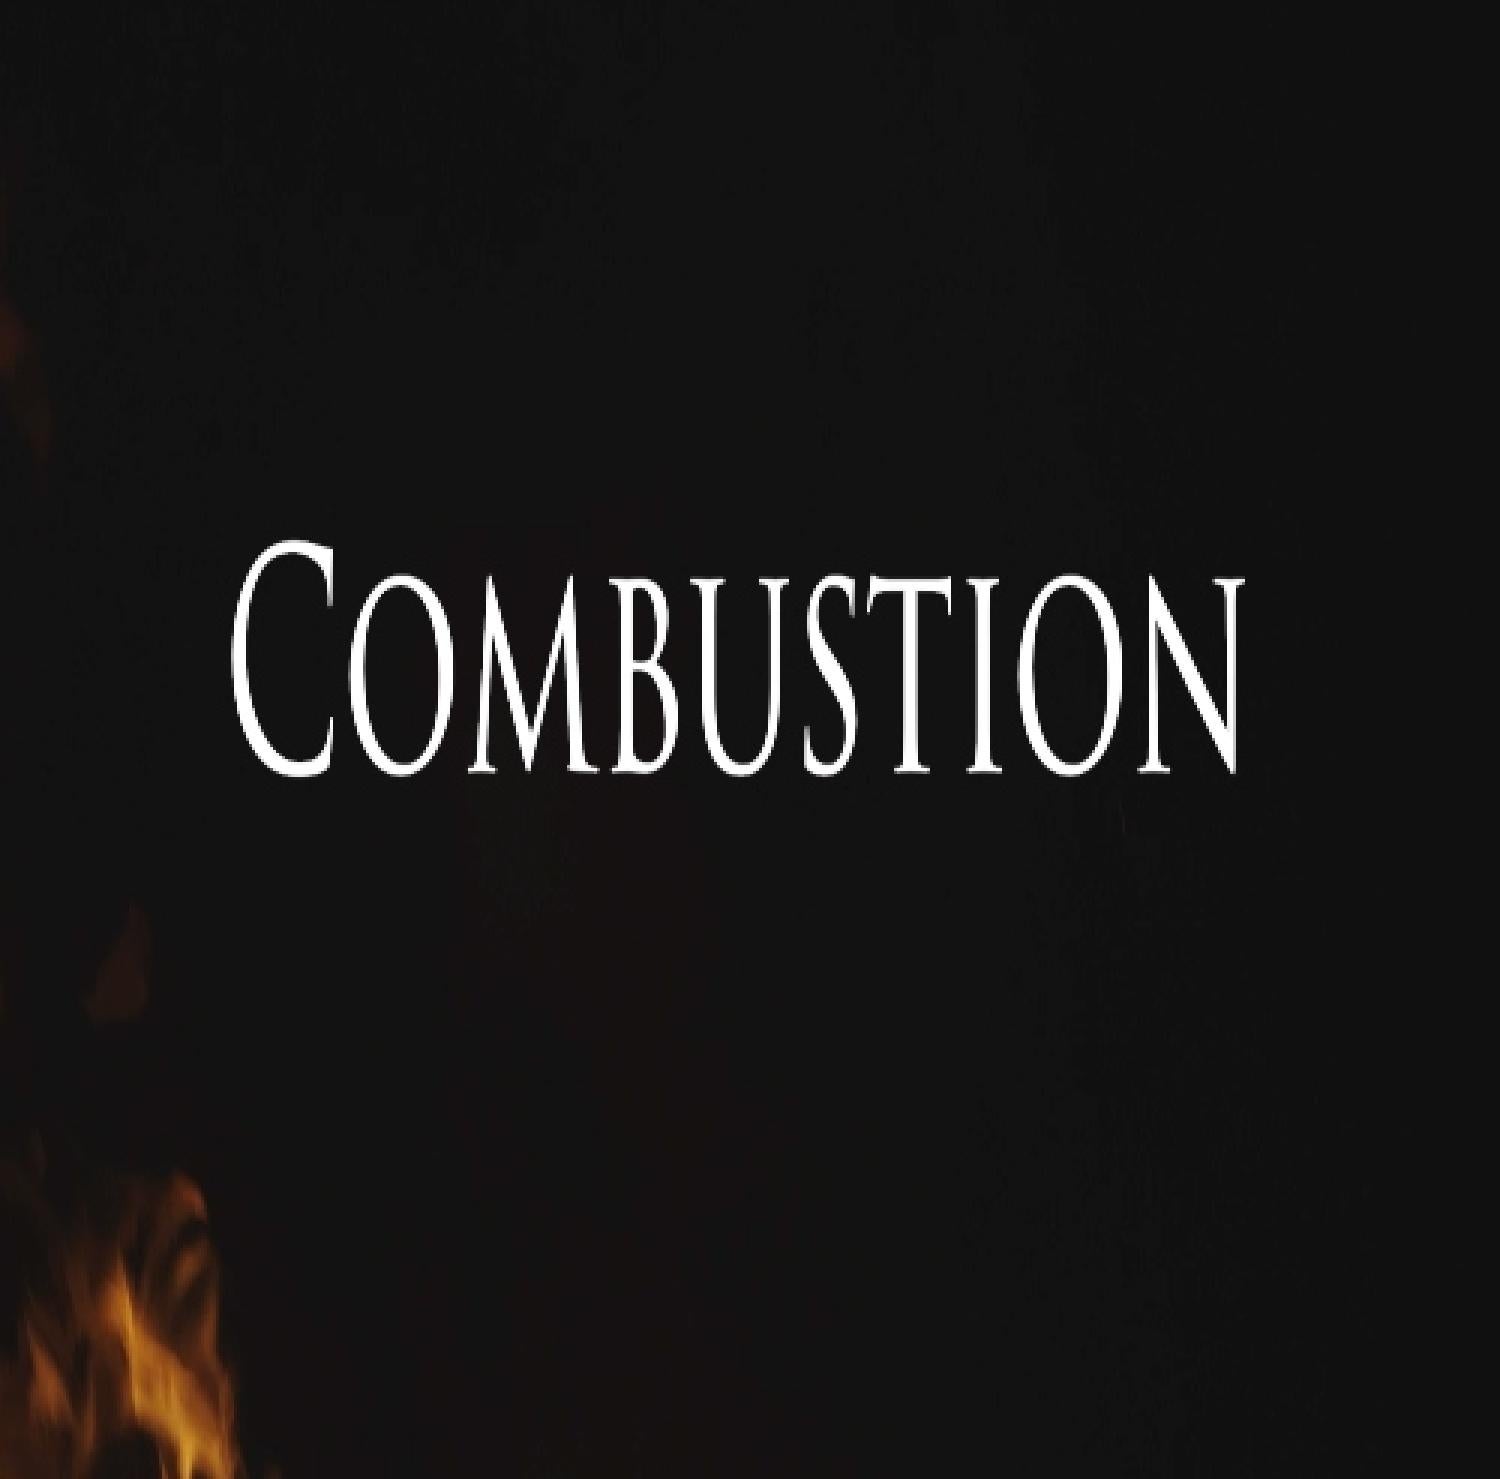 "Combustion" in white text against a dark background